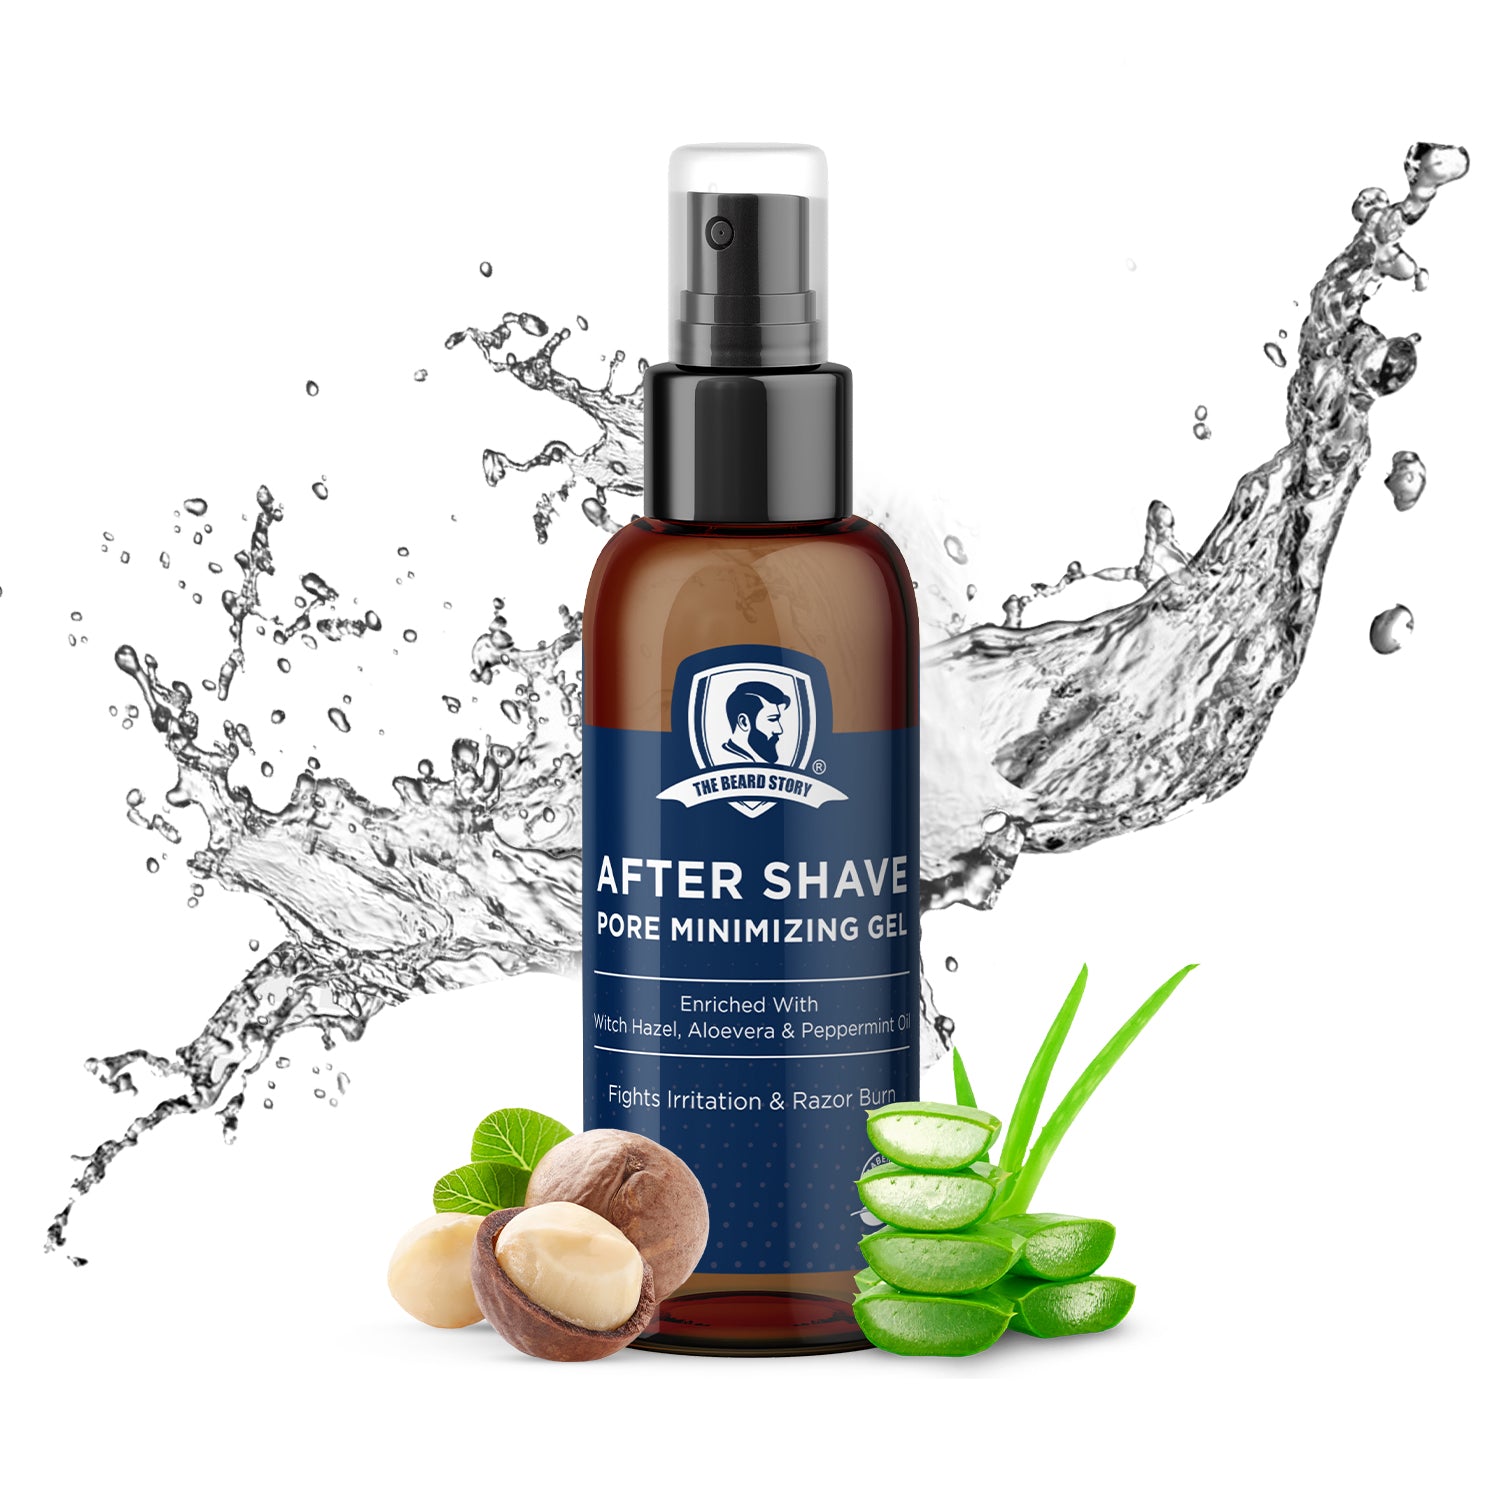 After Shave Gel | For Men | Soothing &amp; Calming | Minimizes Pores &amp; Alcohol Free | Witch Hazel, Aloe vera |  50g